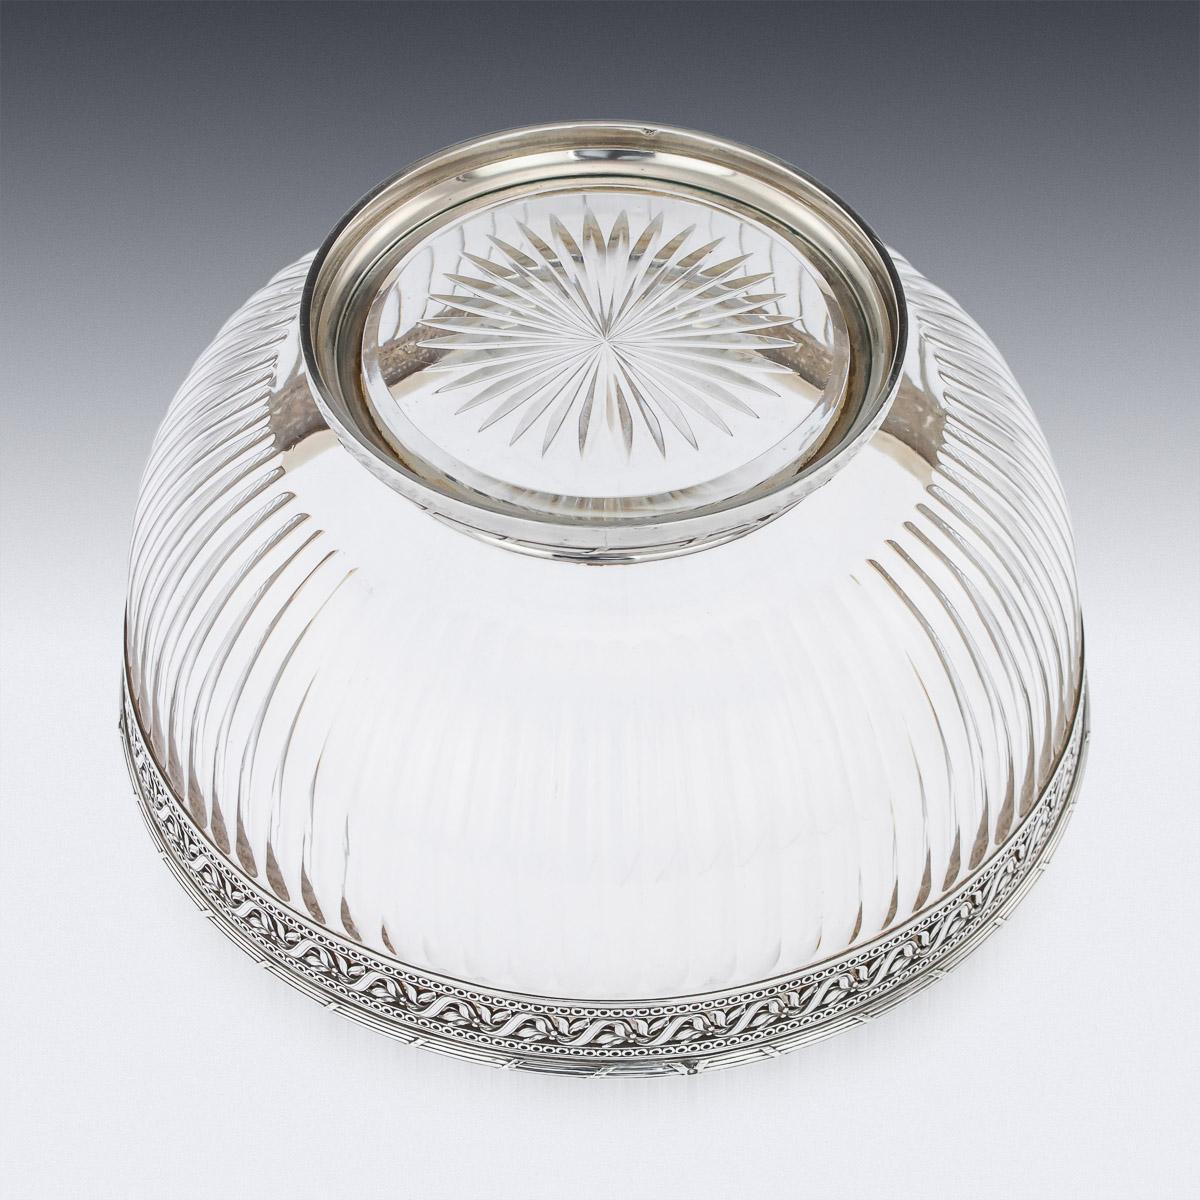 20th Century French Empire Solid Silver & Glass Bowl, Paris, c.1900 For Sale 2